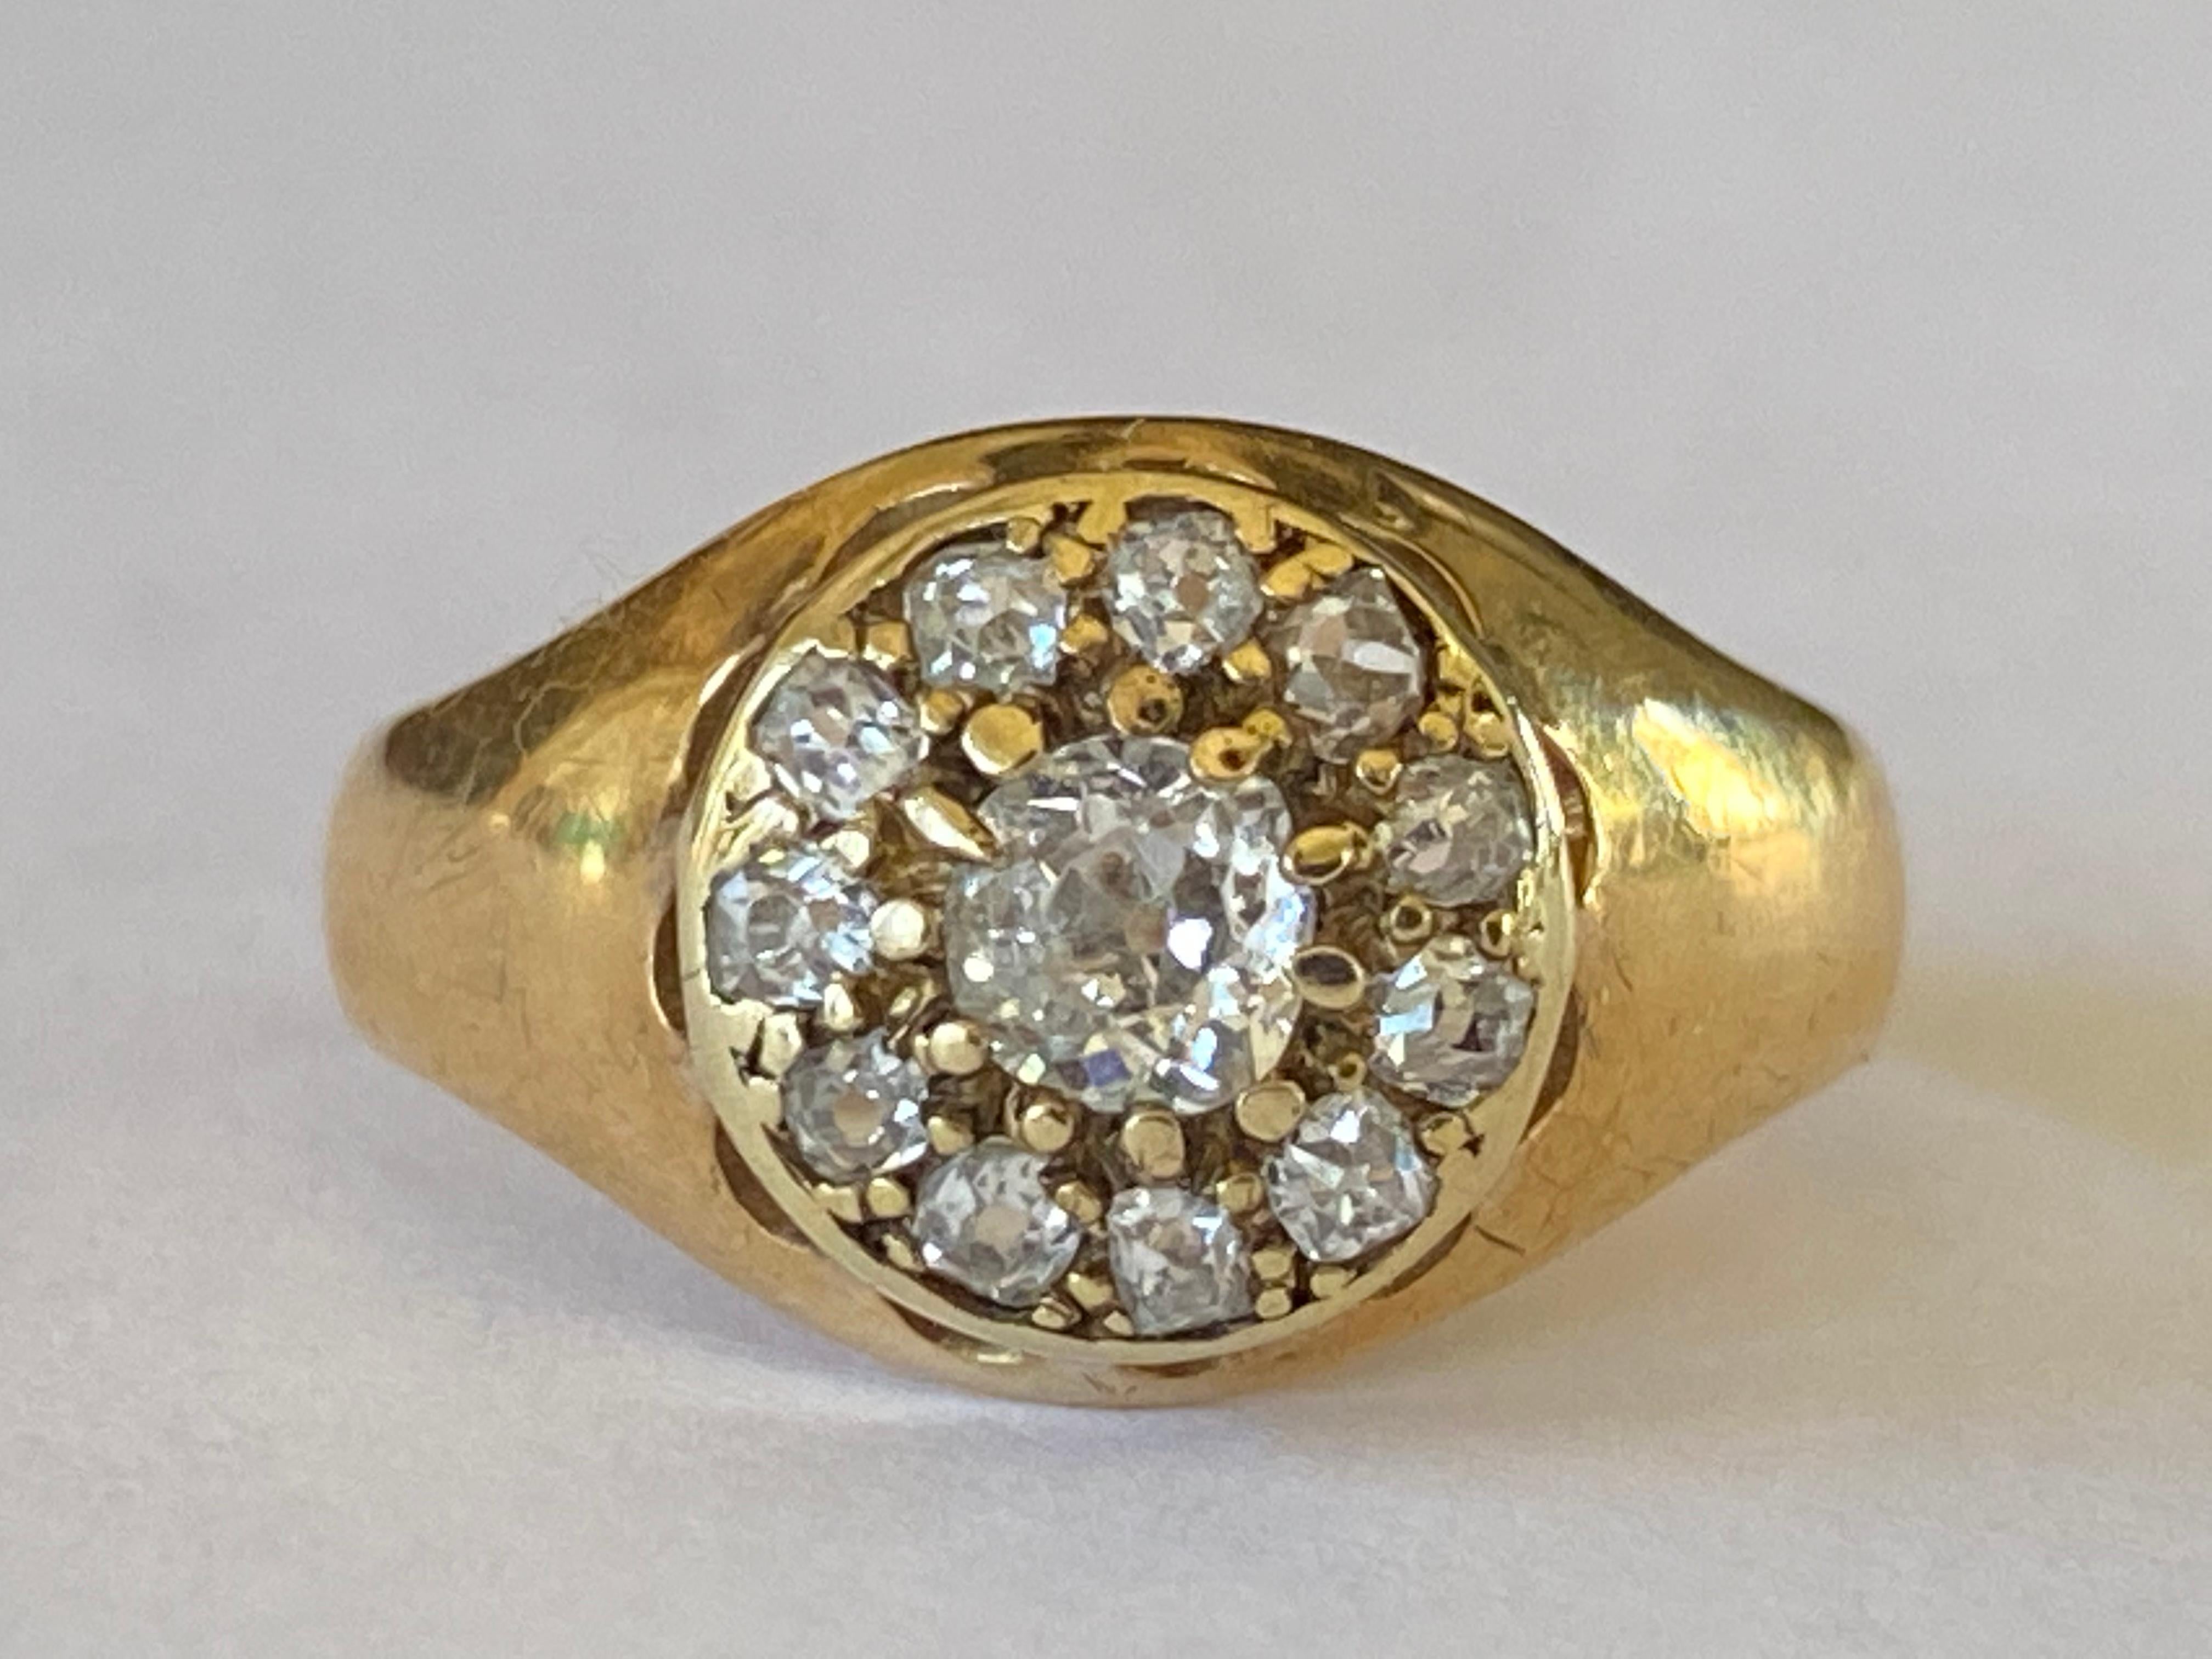 This antique Victorian cluster ring is designed around an Old Mine cut diamond center stone measuring approximately 0.30 carats, H color, VS clarity encircled by a halo of eleven smaller Old Mine diamonds totaling approximately 0.55 carats and